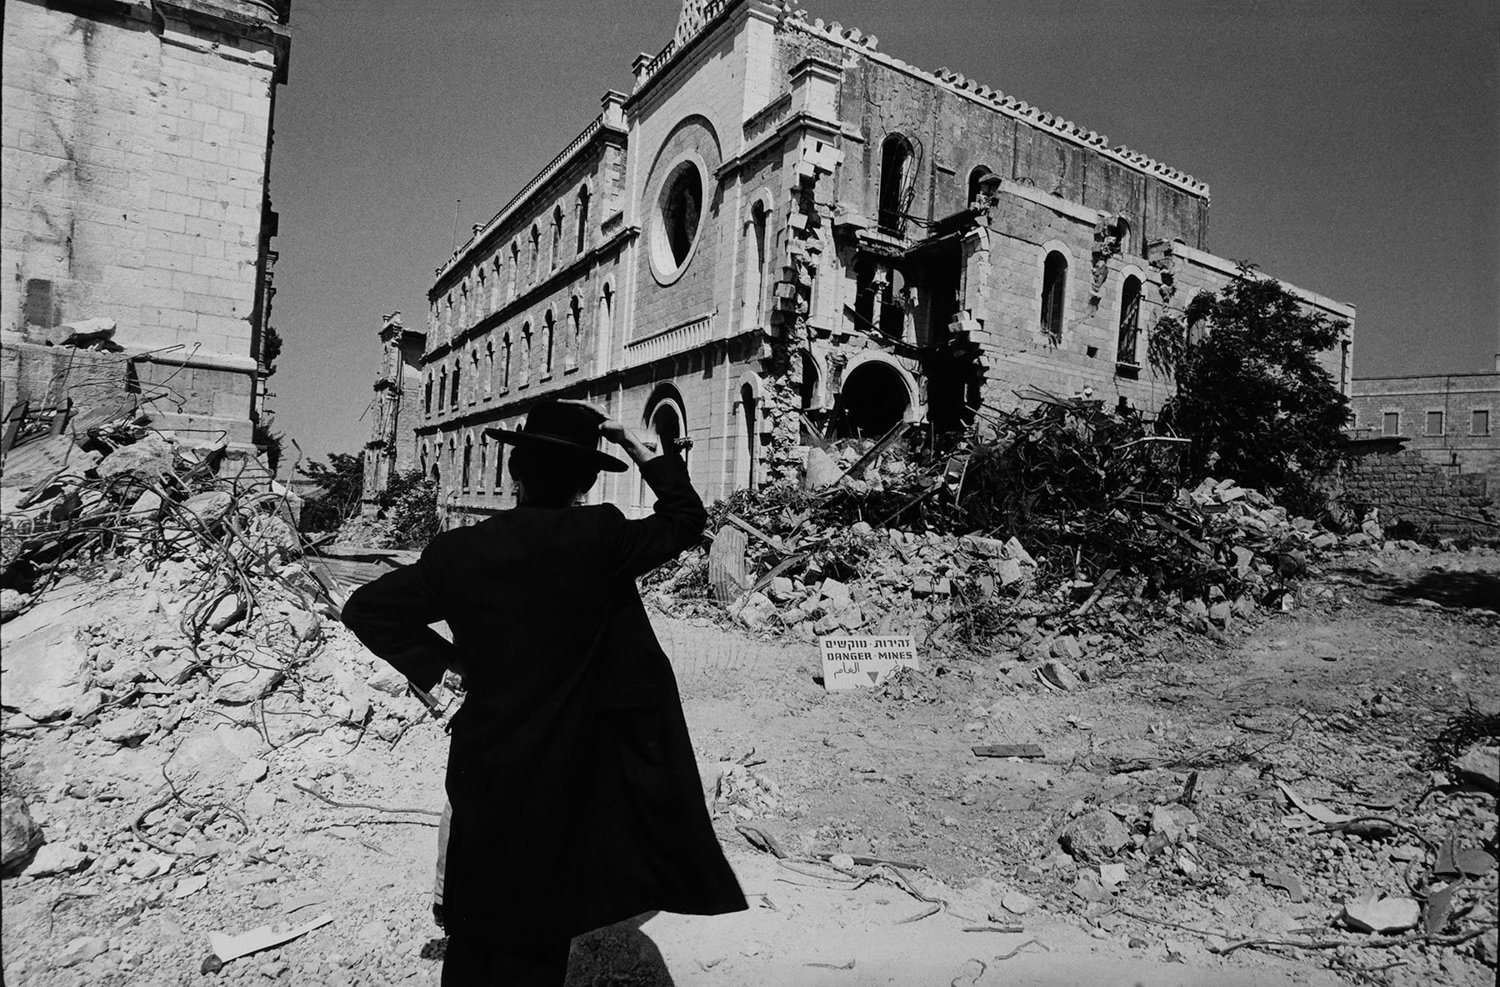 A man looks toward what was then known as ‘Notre Dame de France’ in Jerusalem, in a 1967 photograph by Leonard Freed. A new exhibition of his work, ‘Leonard Freed: Israel Magazine 1967-1968’ is on display at the Hebrew Home at Riverdale’s Derfner Judaica Museum through Jan. 5.